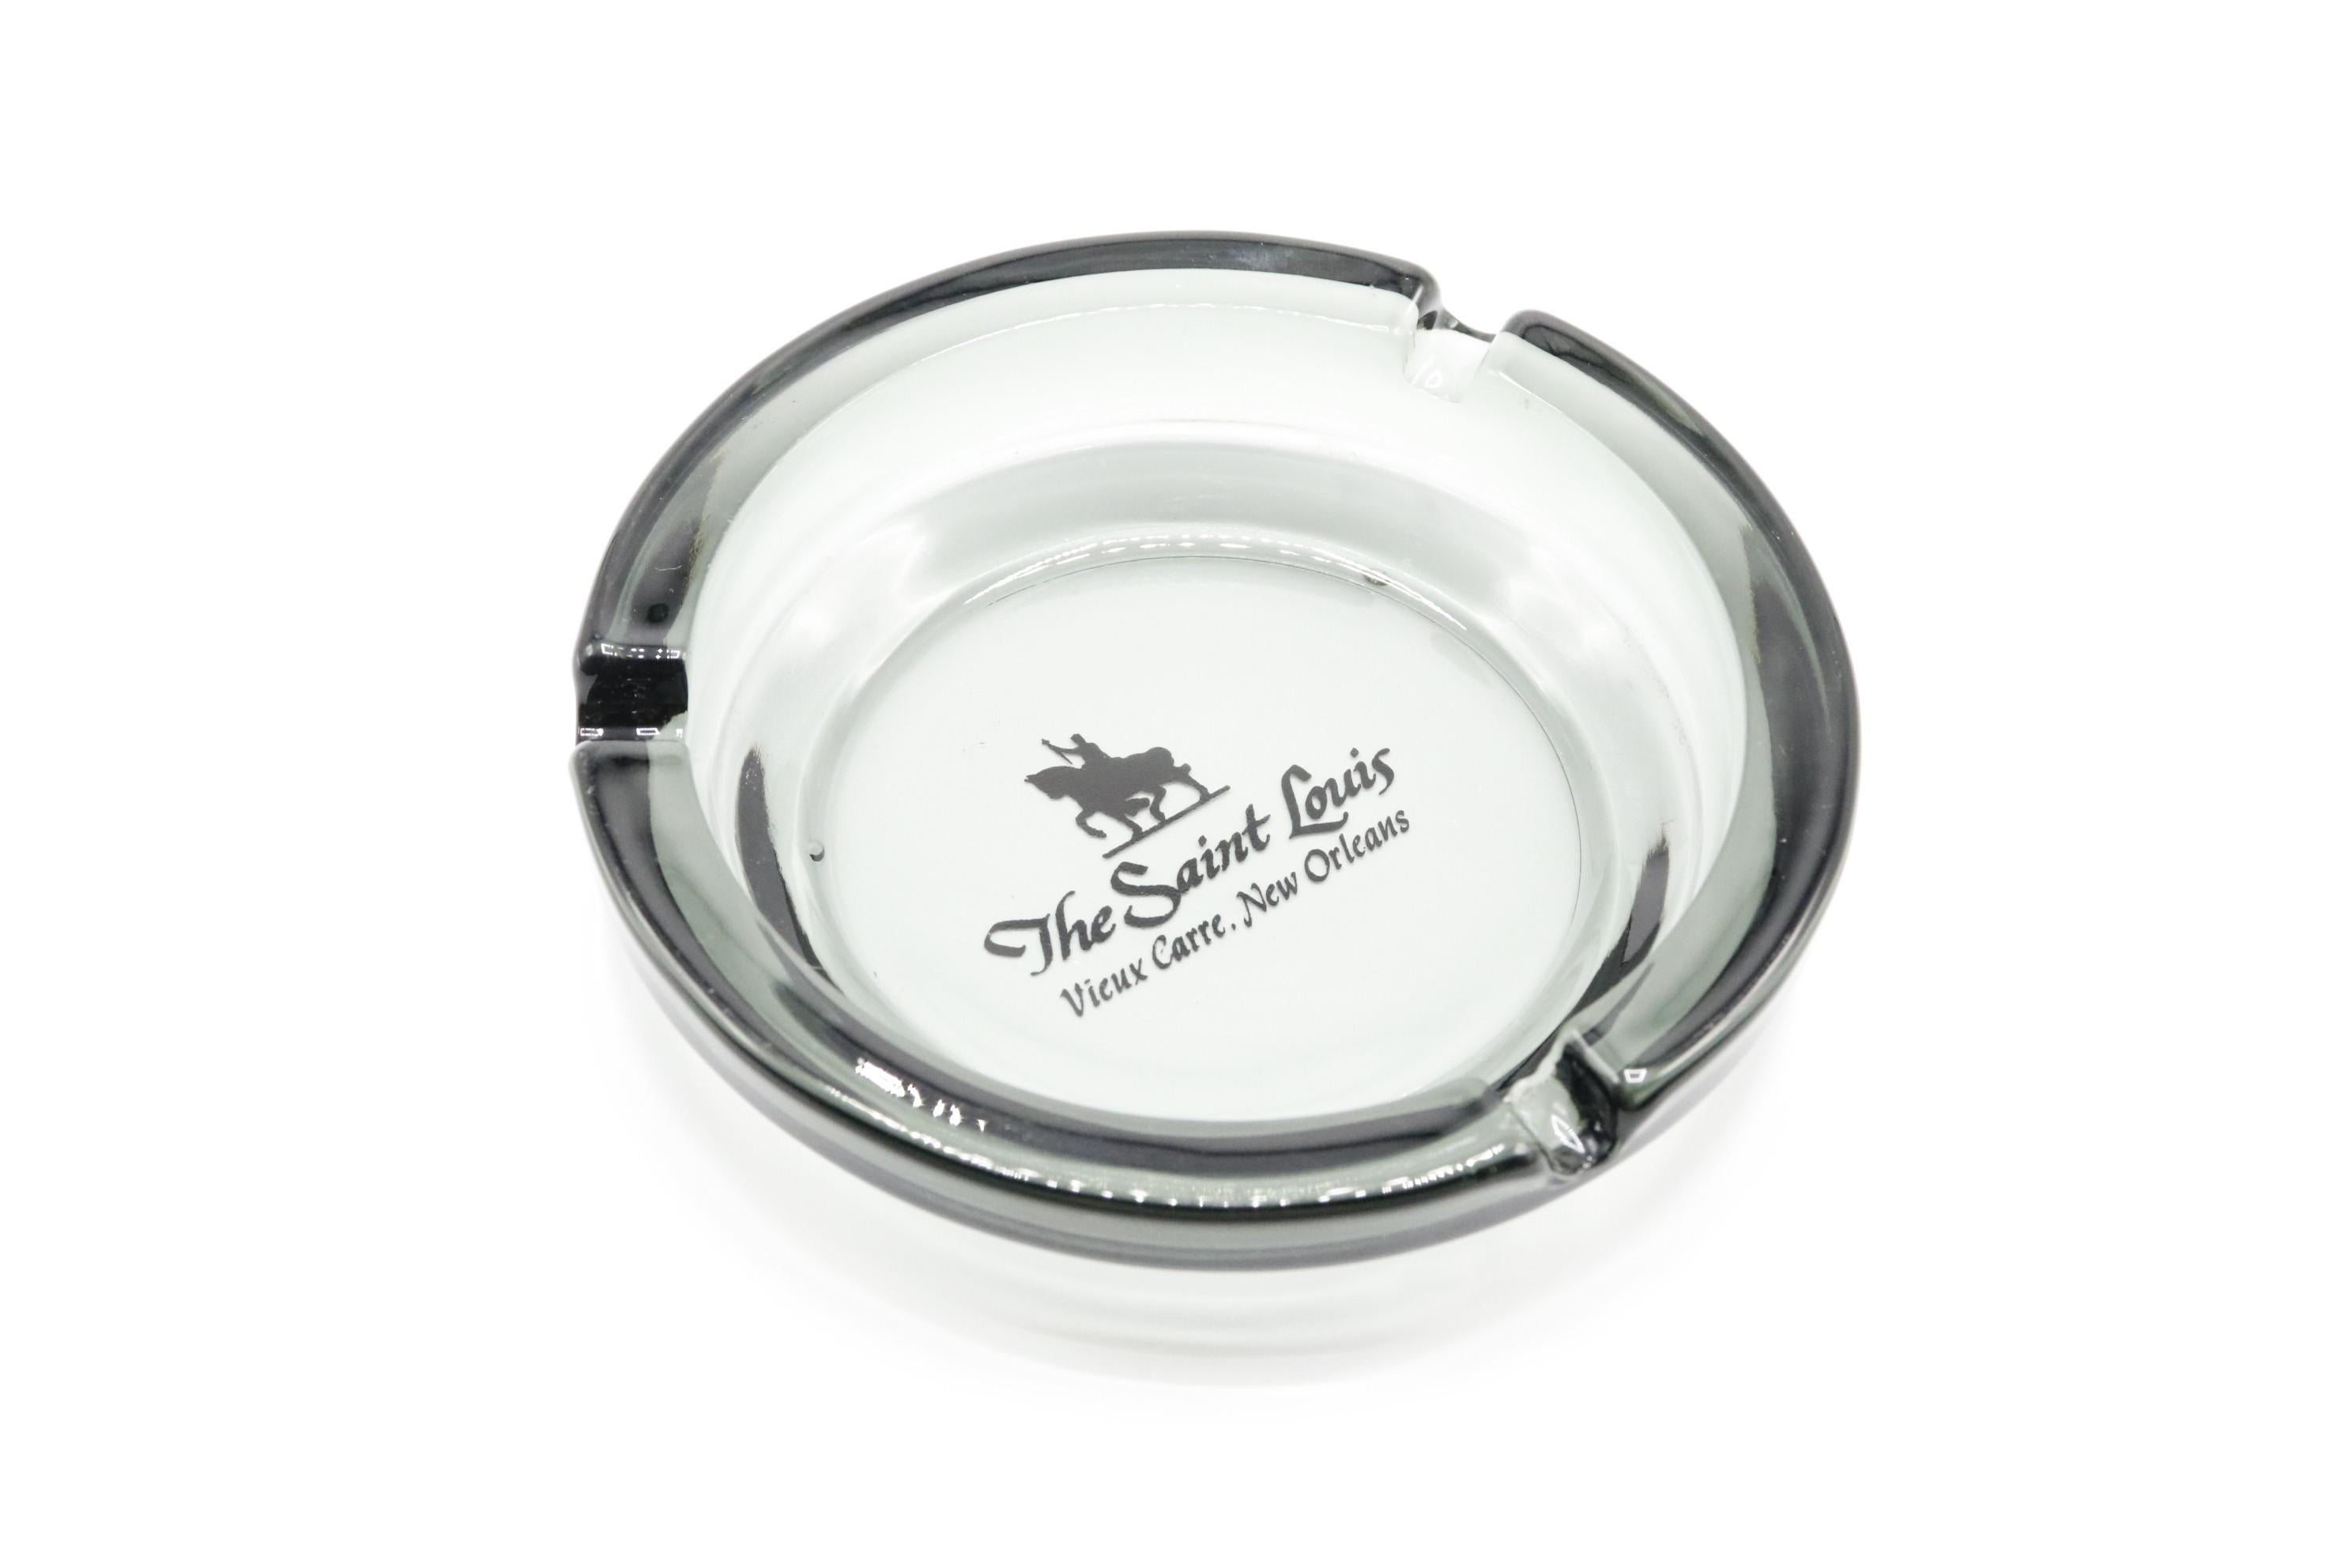 A gray tinted glass ashtray from The Saint Louis Hotel, now the Hotel Mazarin, in the French Quarter, New Orleans. The center is printed with their logo in black and reads “The Saint Louis, Vieux Carre, New Orleans”. 